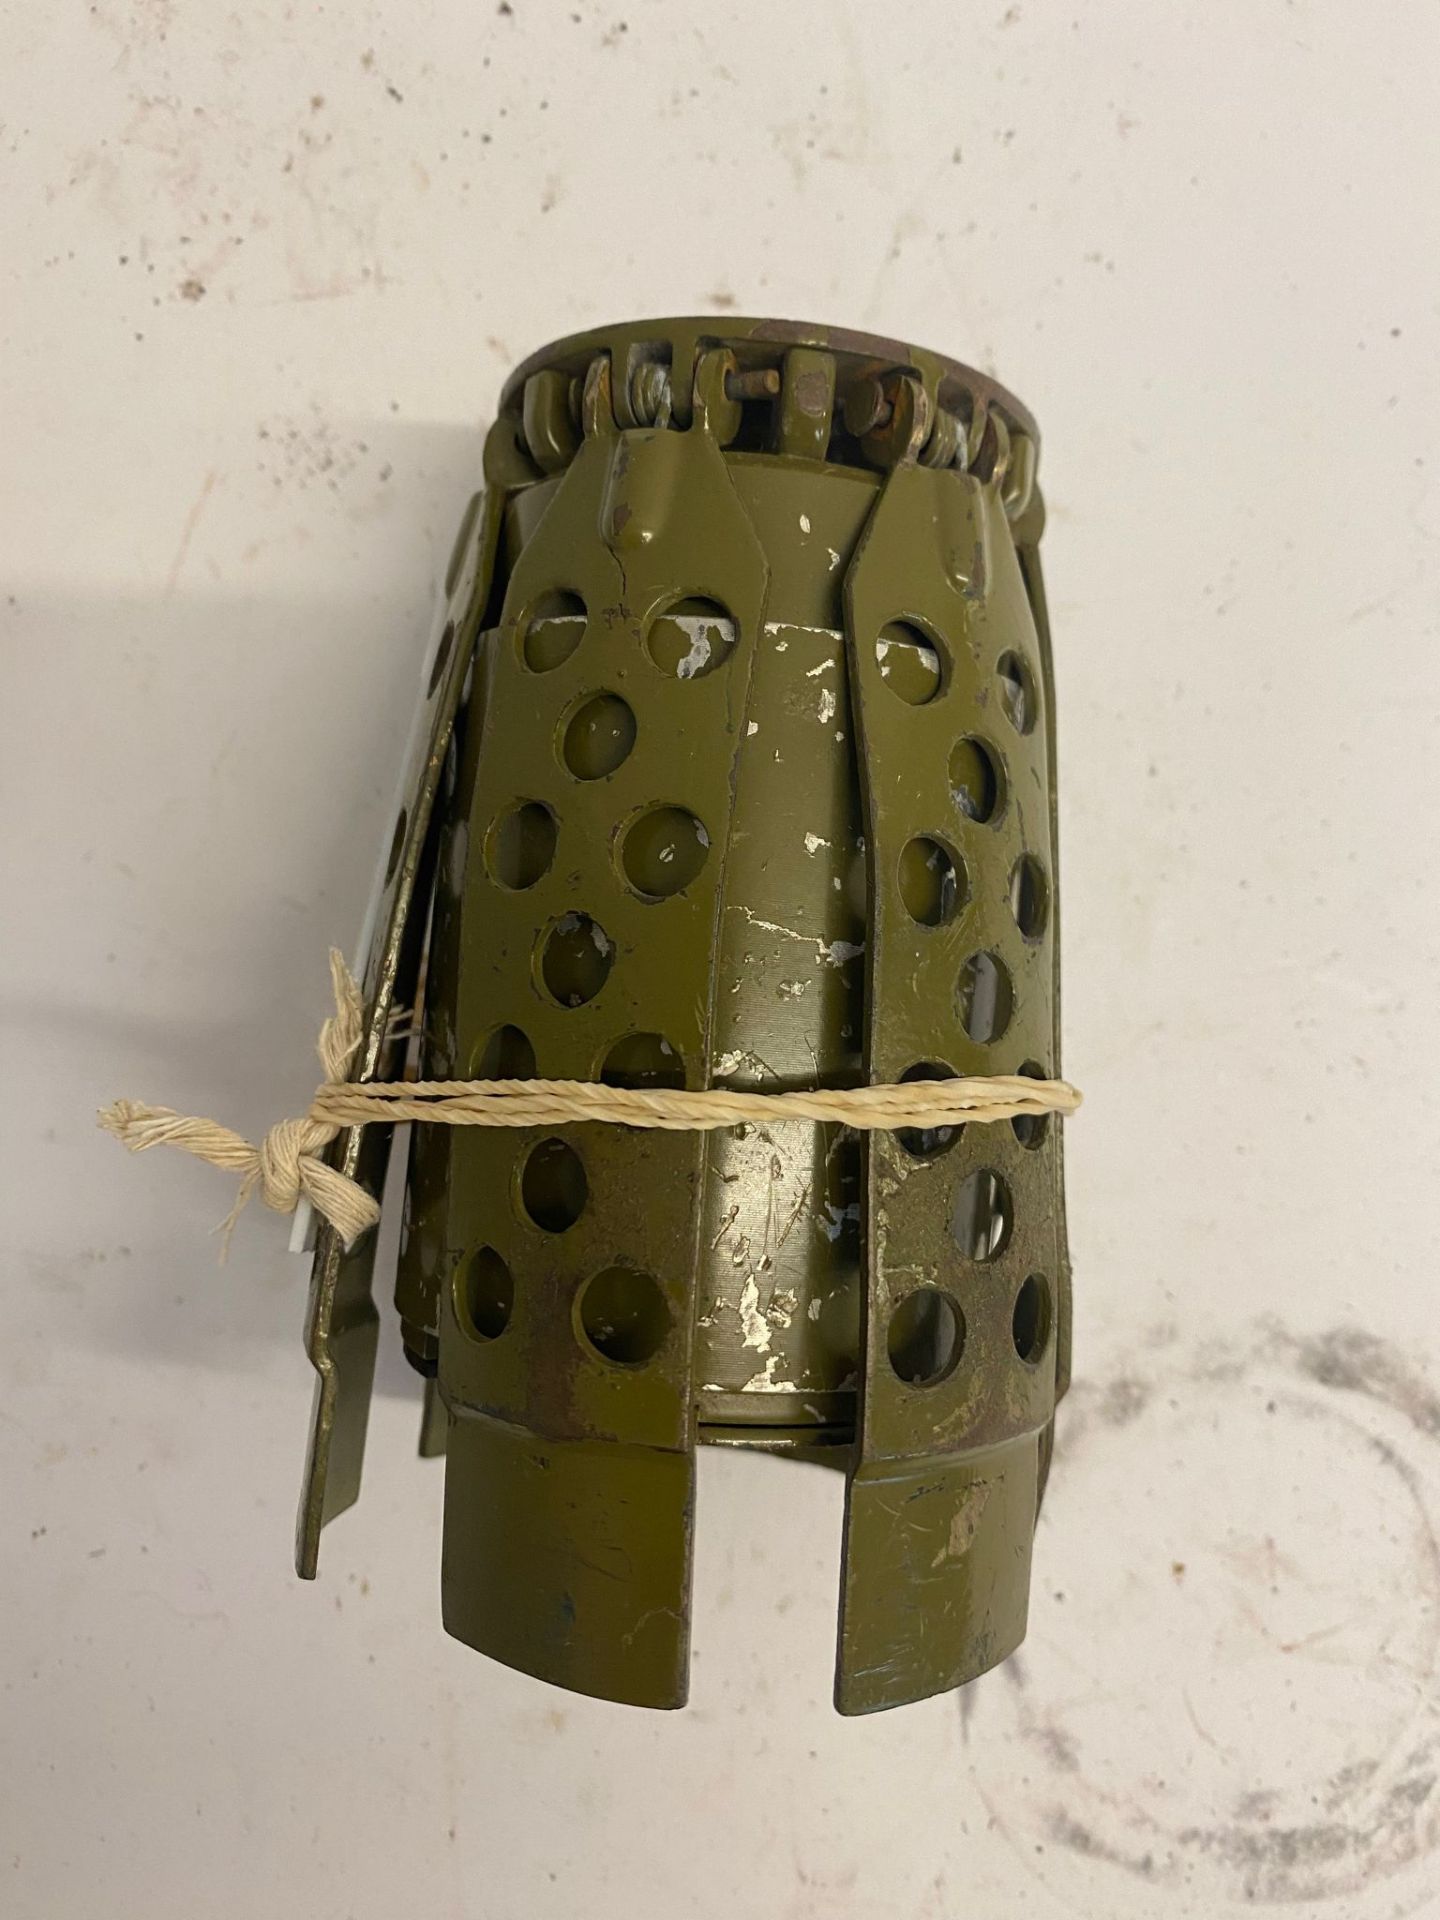 A rare Inert Russian Pom-2s mine. This lot will be available to collect in person 48 hours after the - Image 2 of 3